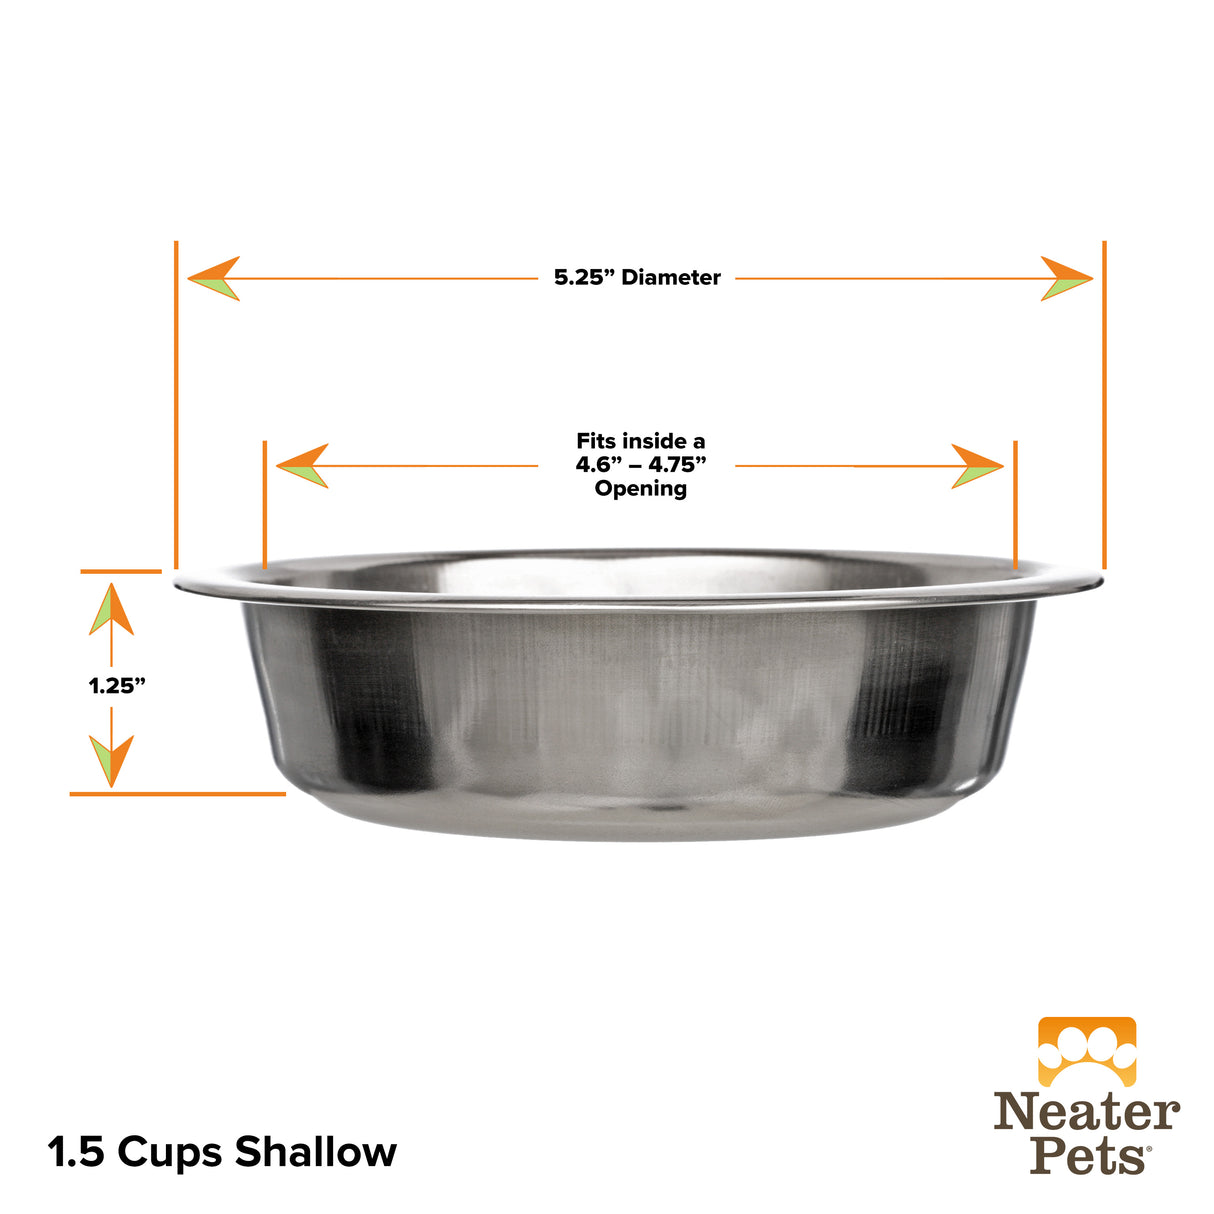 1.5 cup shallow Stainless Steel Replacement Bowls for Neater Feeder dimensions